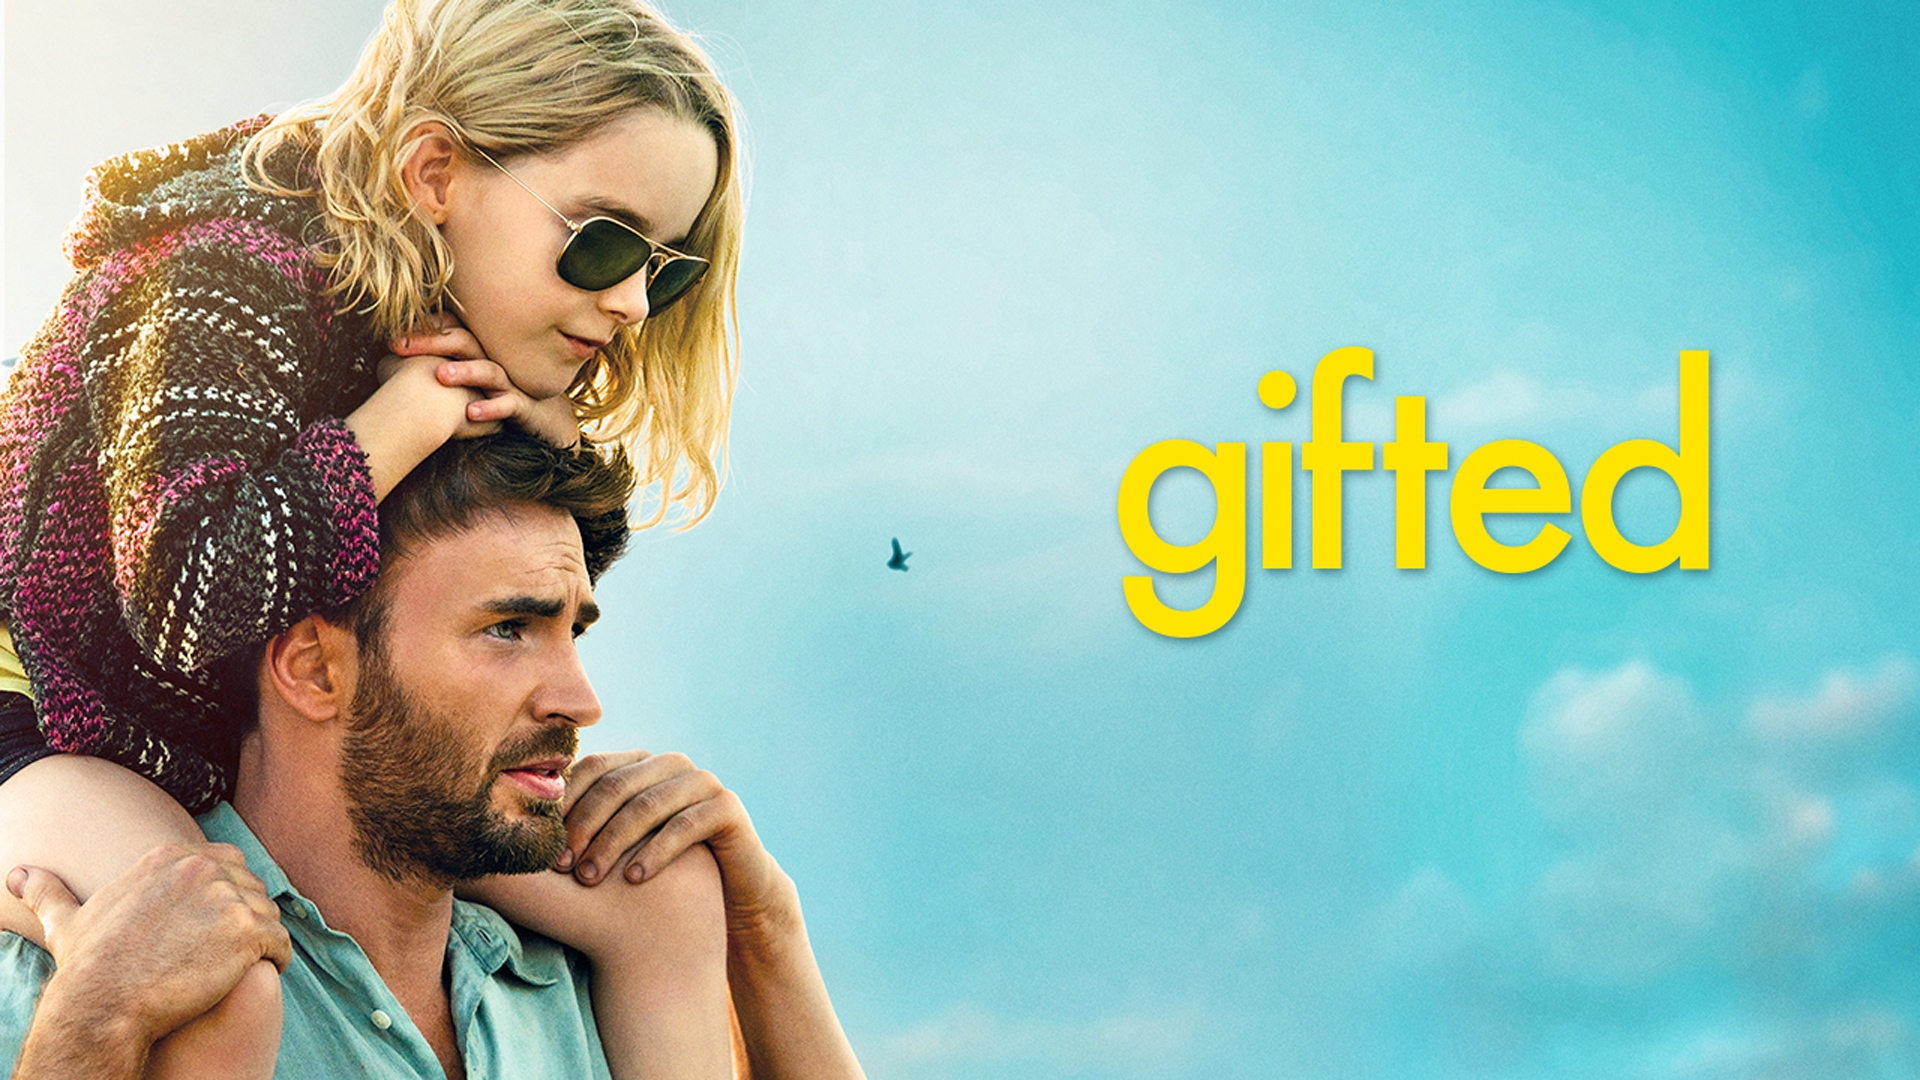 Stream Gifted Online Download and Watch HD Movies Stan